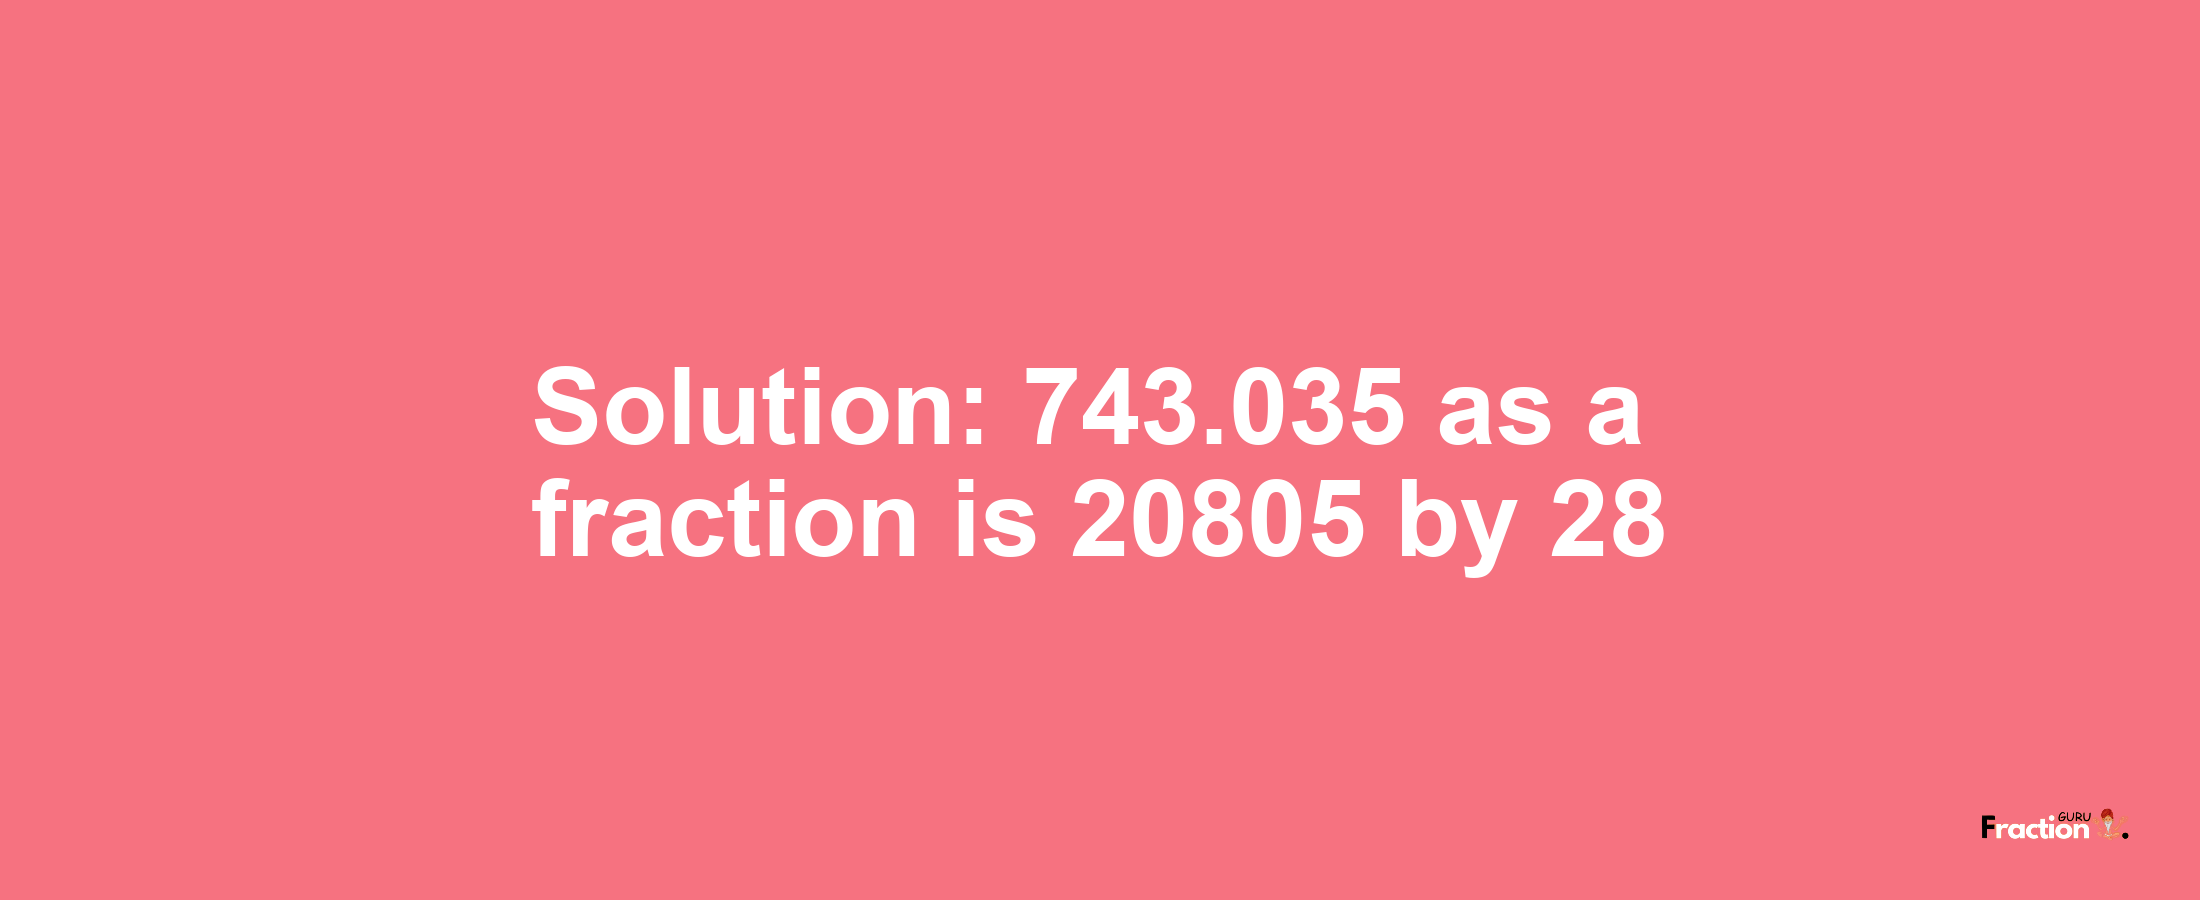 Solution:743.035 as a fraction is 20805/28